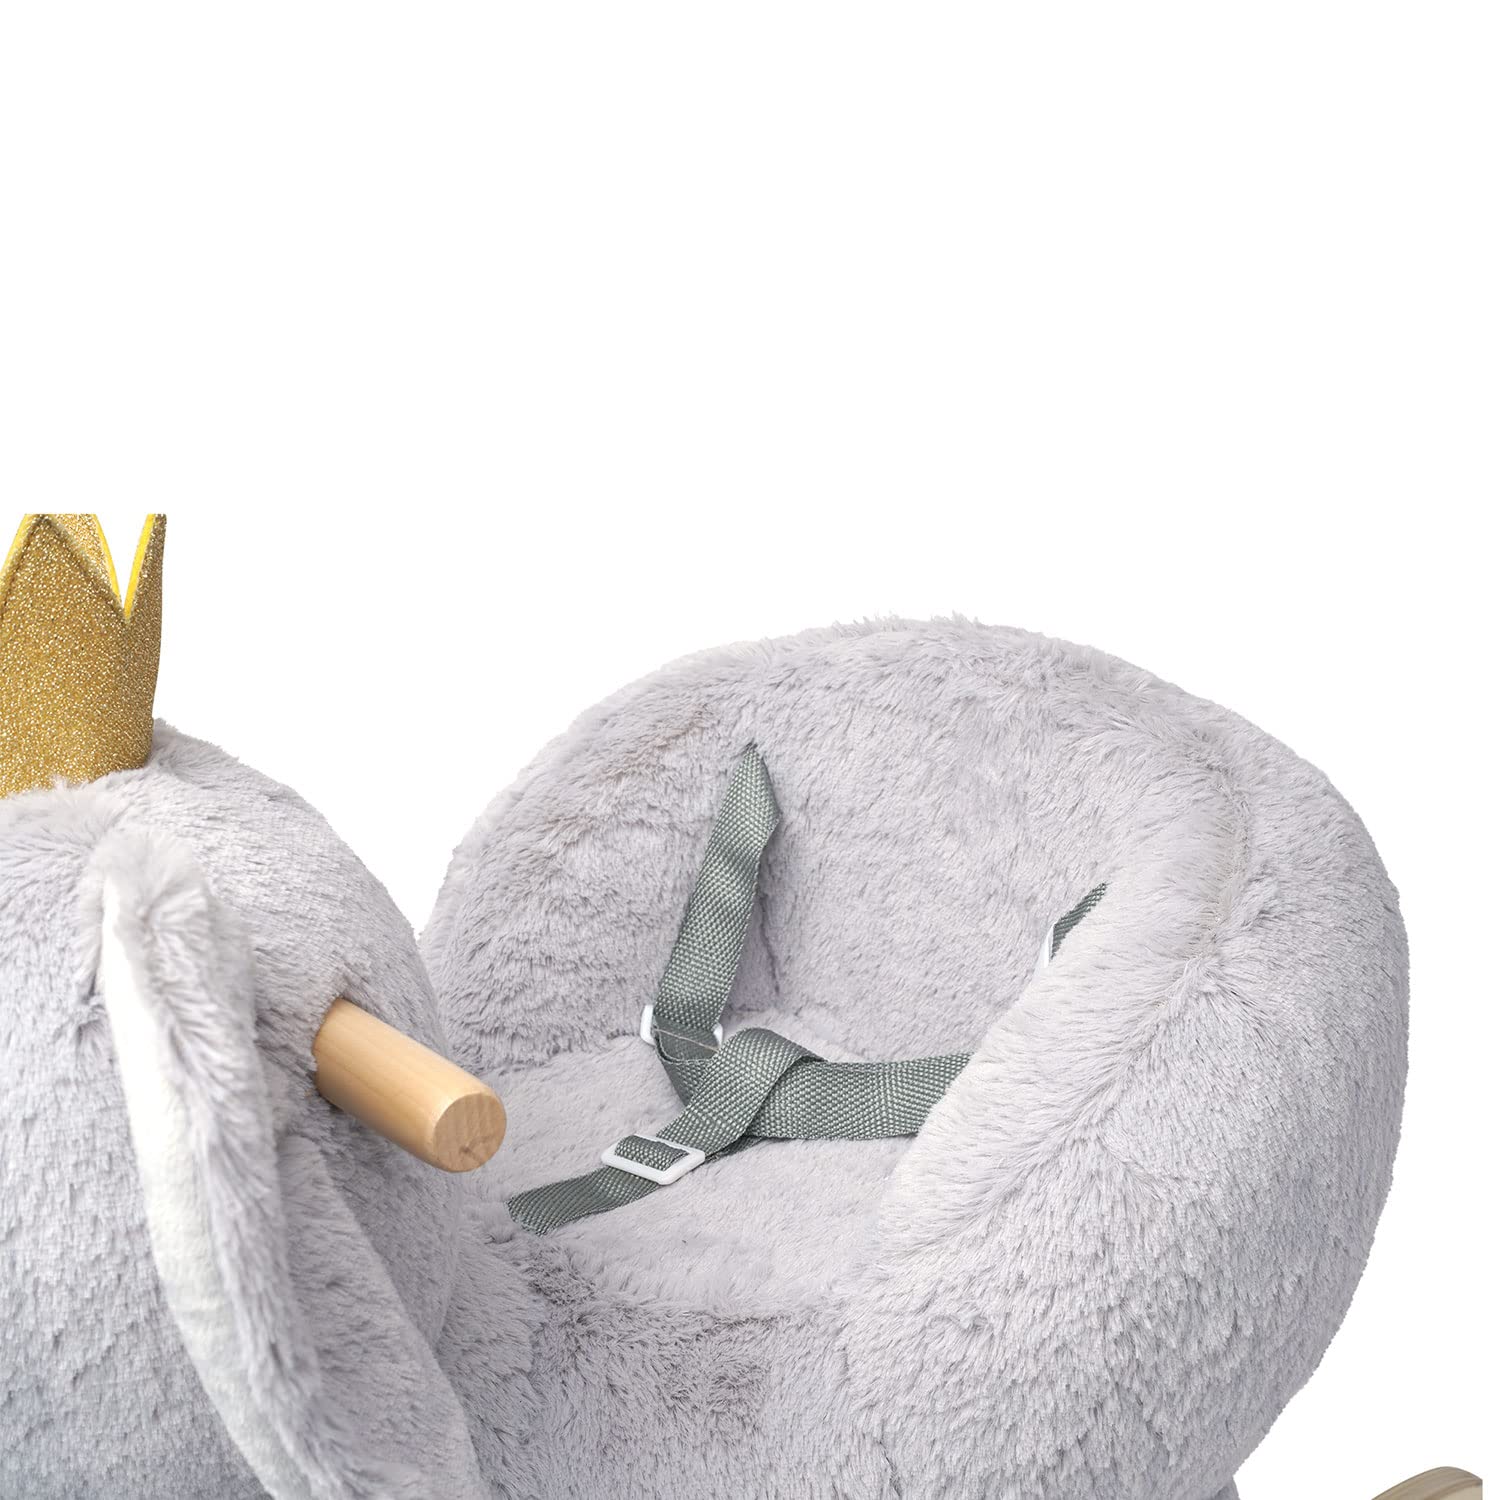 Manhattan Toy Plush Elephant Wooden Rocking Toy with Crown, Adjustable Seat Belt and Wooden Hand Grips Large